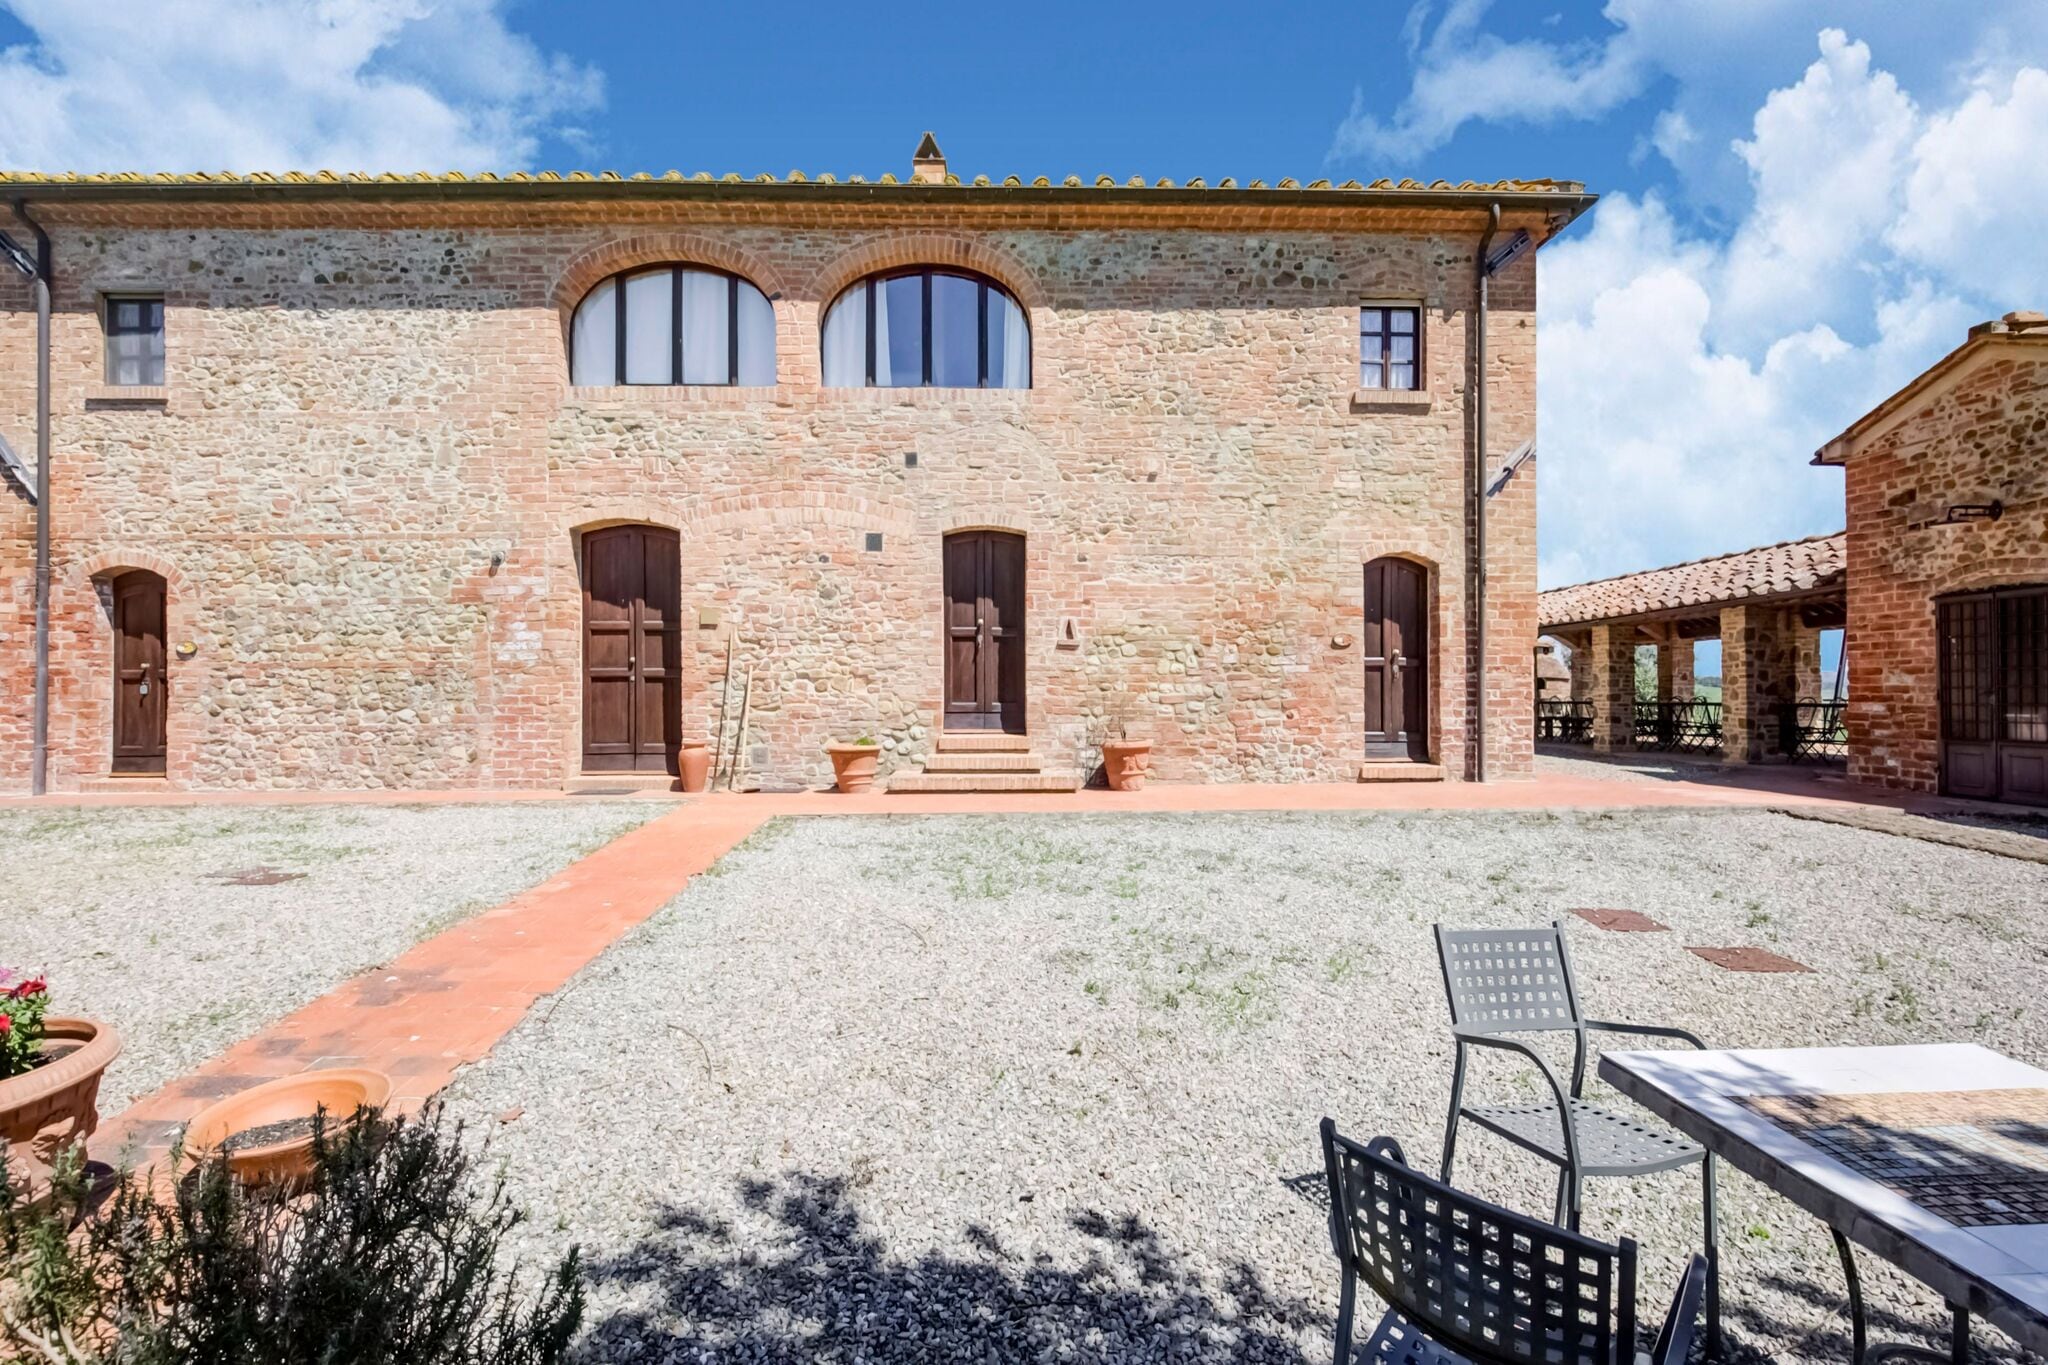 Flat in a typical Tuscan farmhouse with swimming pool